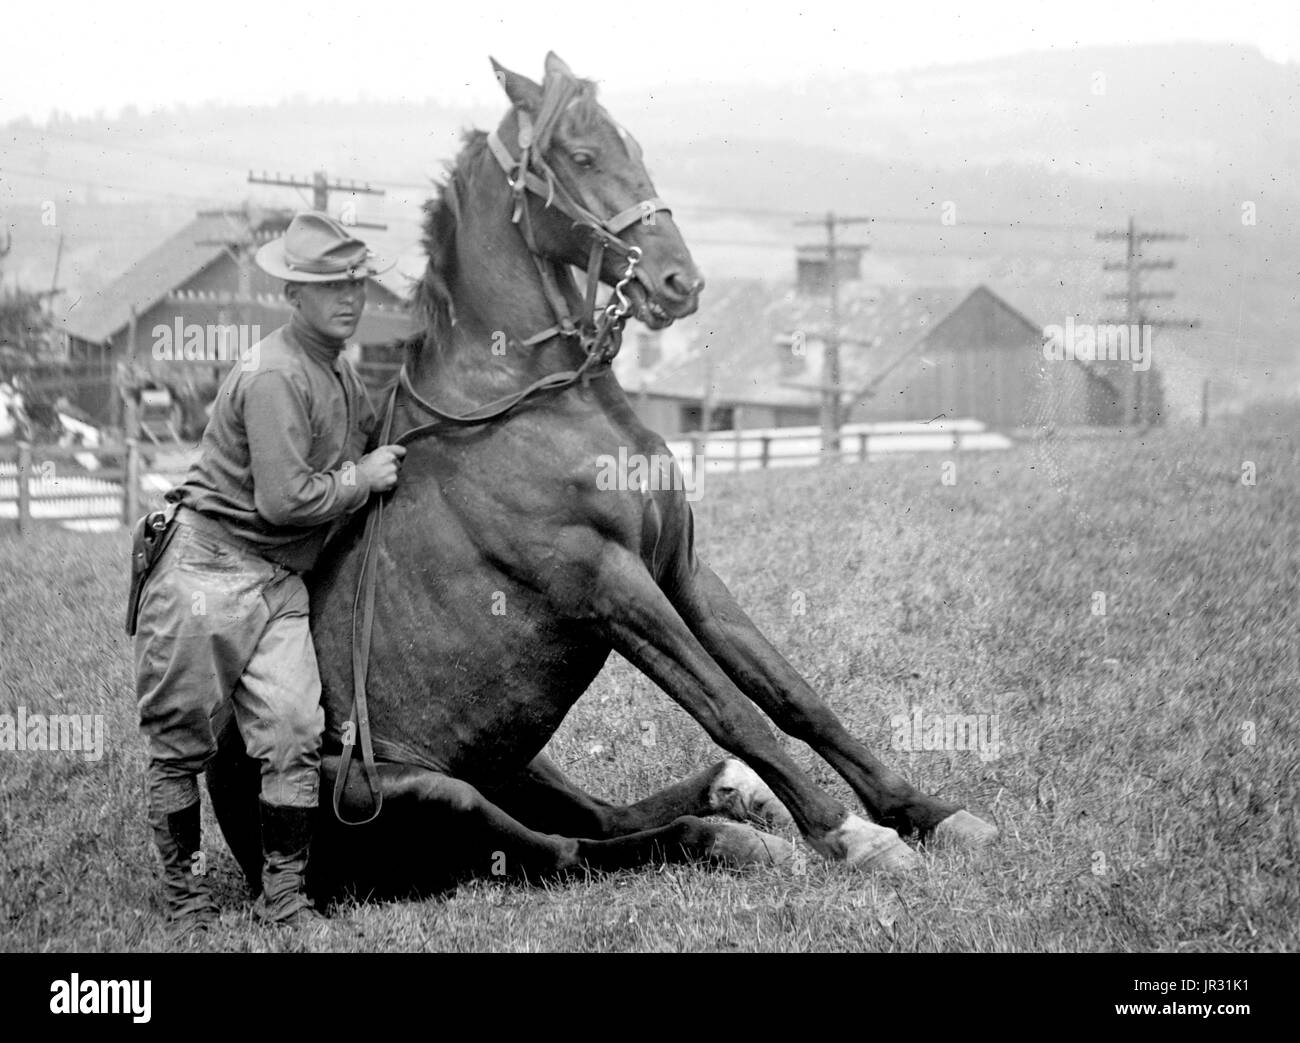 US Army horse stunts, B Troop, 15th US Cavalry, Frostburg, Maryland. The United States Cavalry was the designation of the mounted force of the United States Army from the late 18th to the early 20th century. Photographed by National Photo Company, 1909. Stock Photo